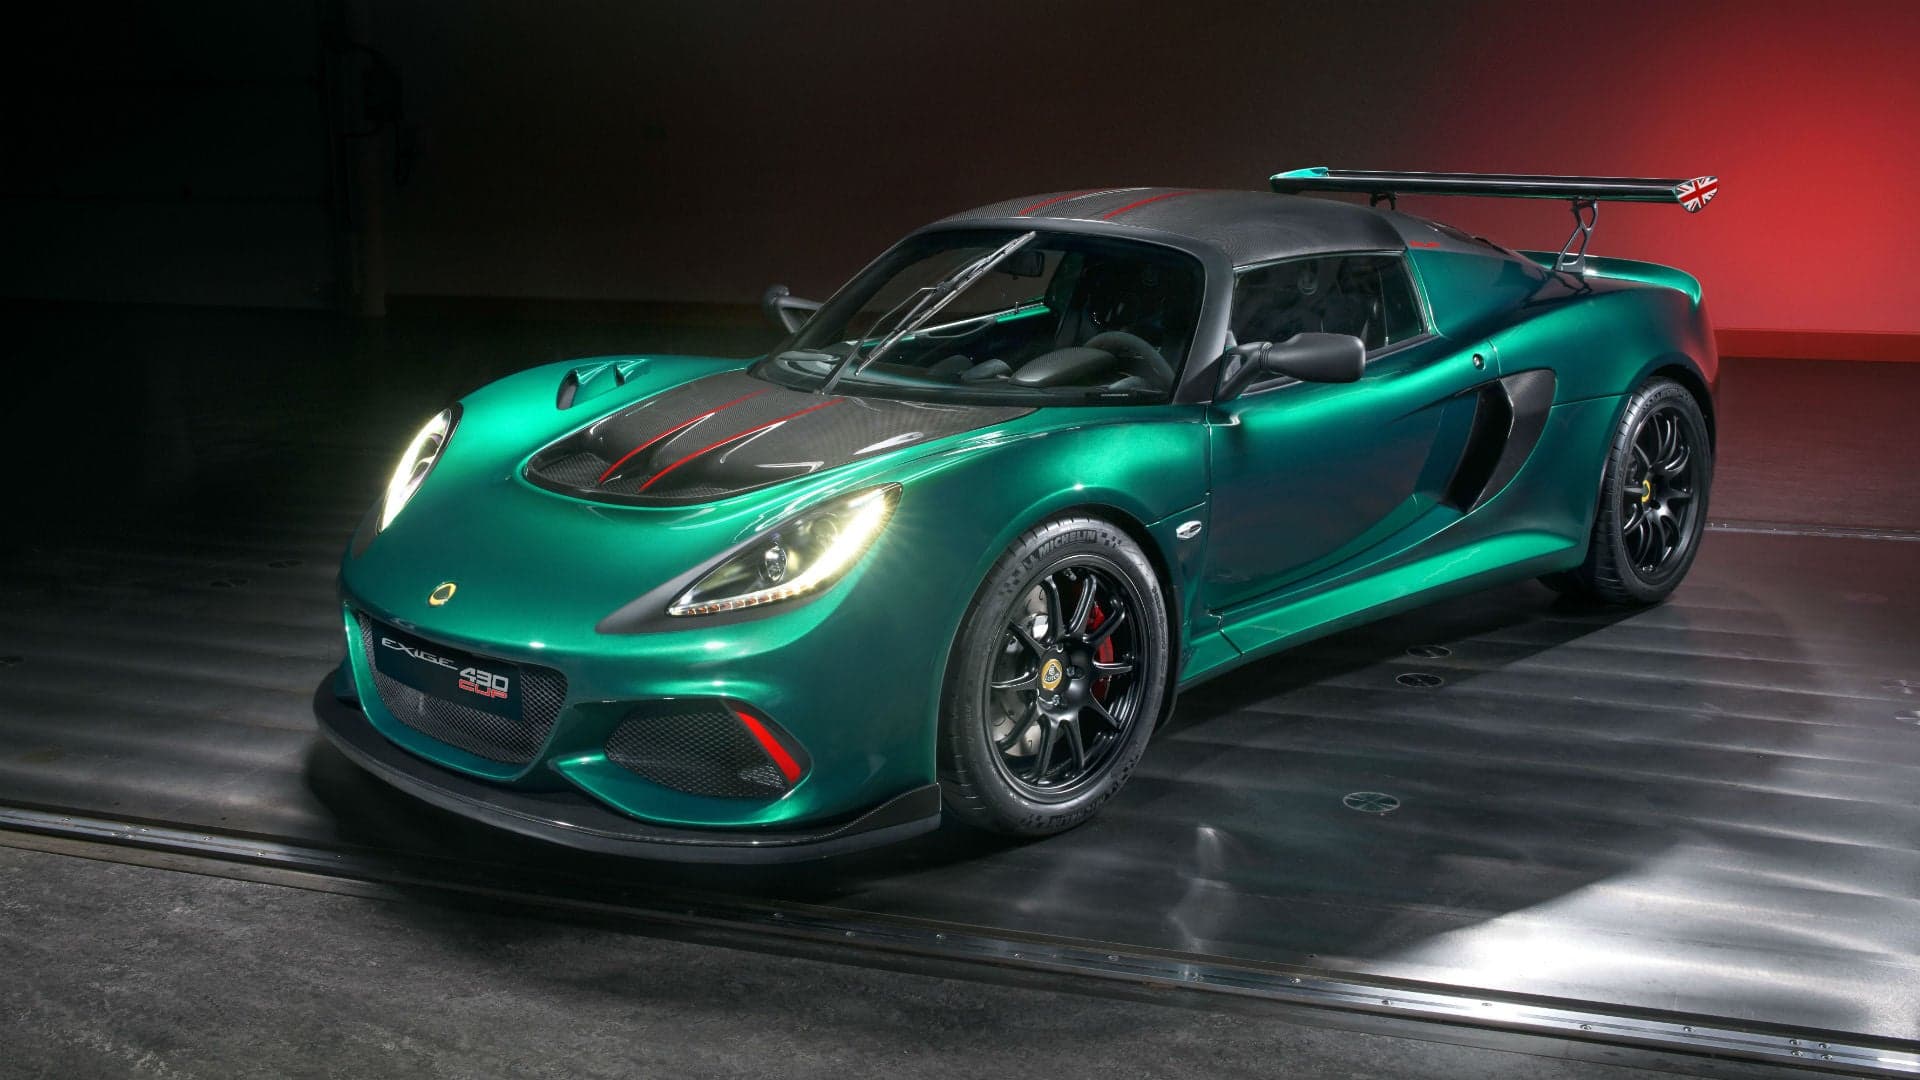 Lotus to Introduce 2 New Sports Cars and an SUV, CEO Says